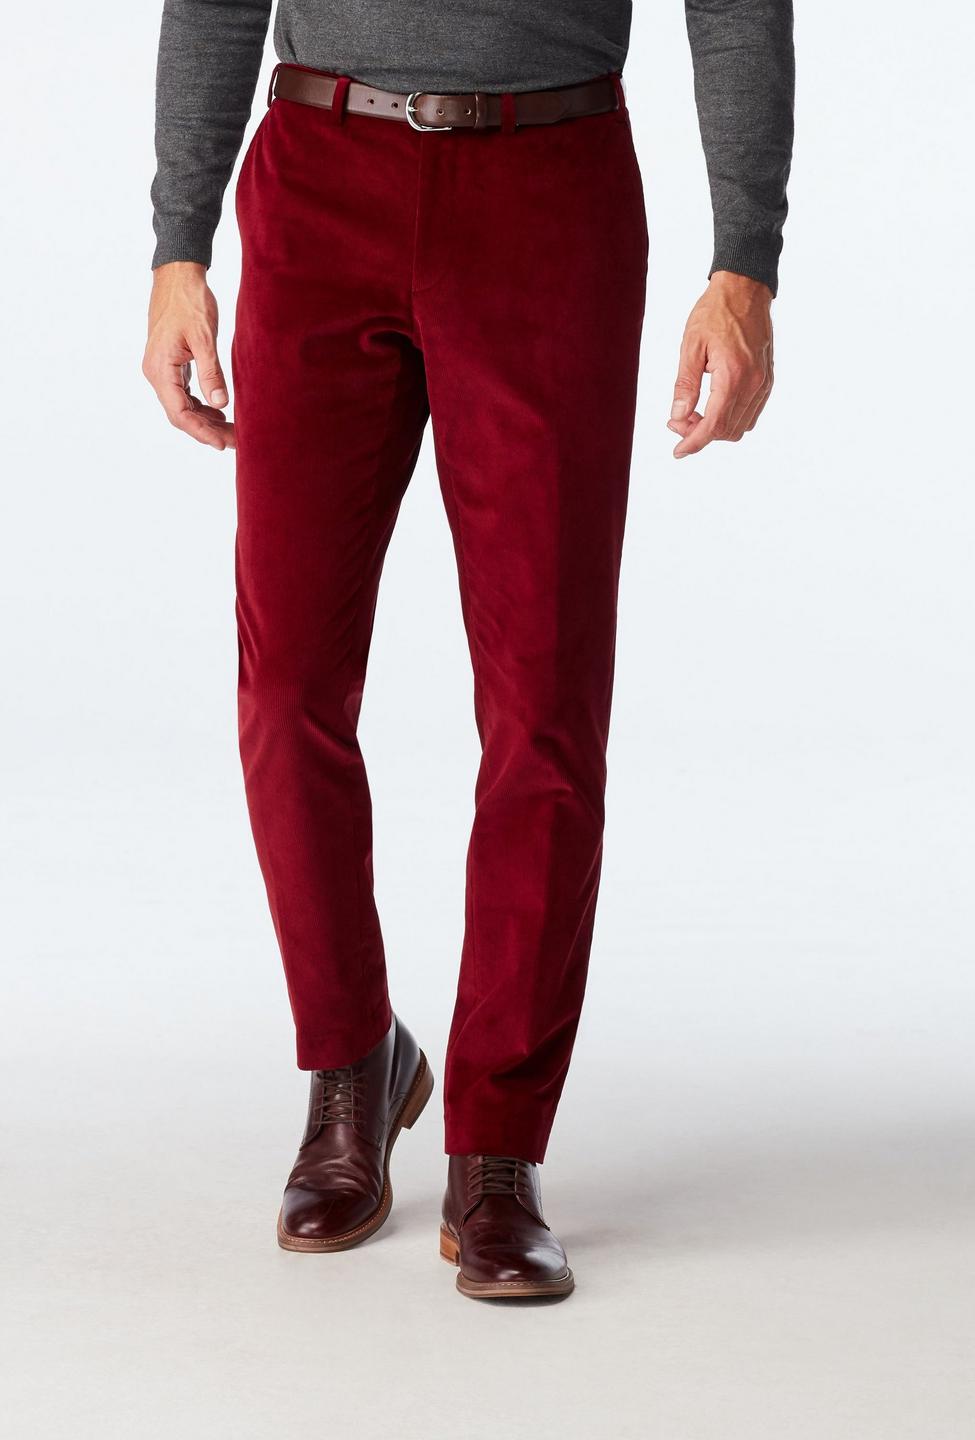 Red pants - Flaxton Solid Design from Seasonal Indochino Collection